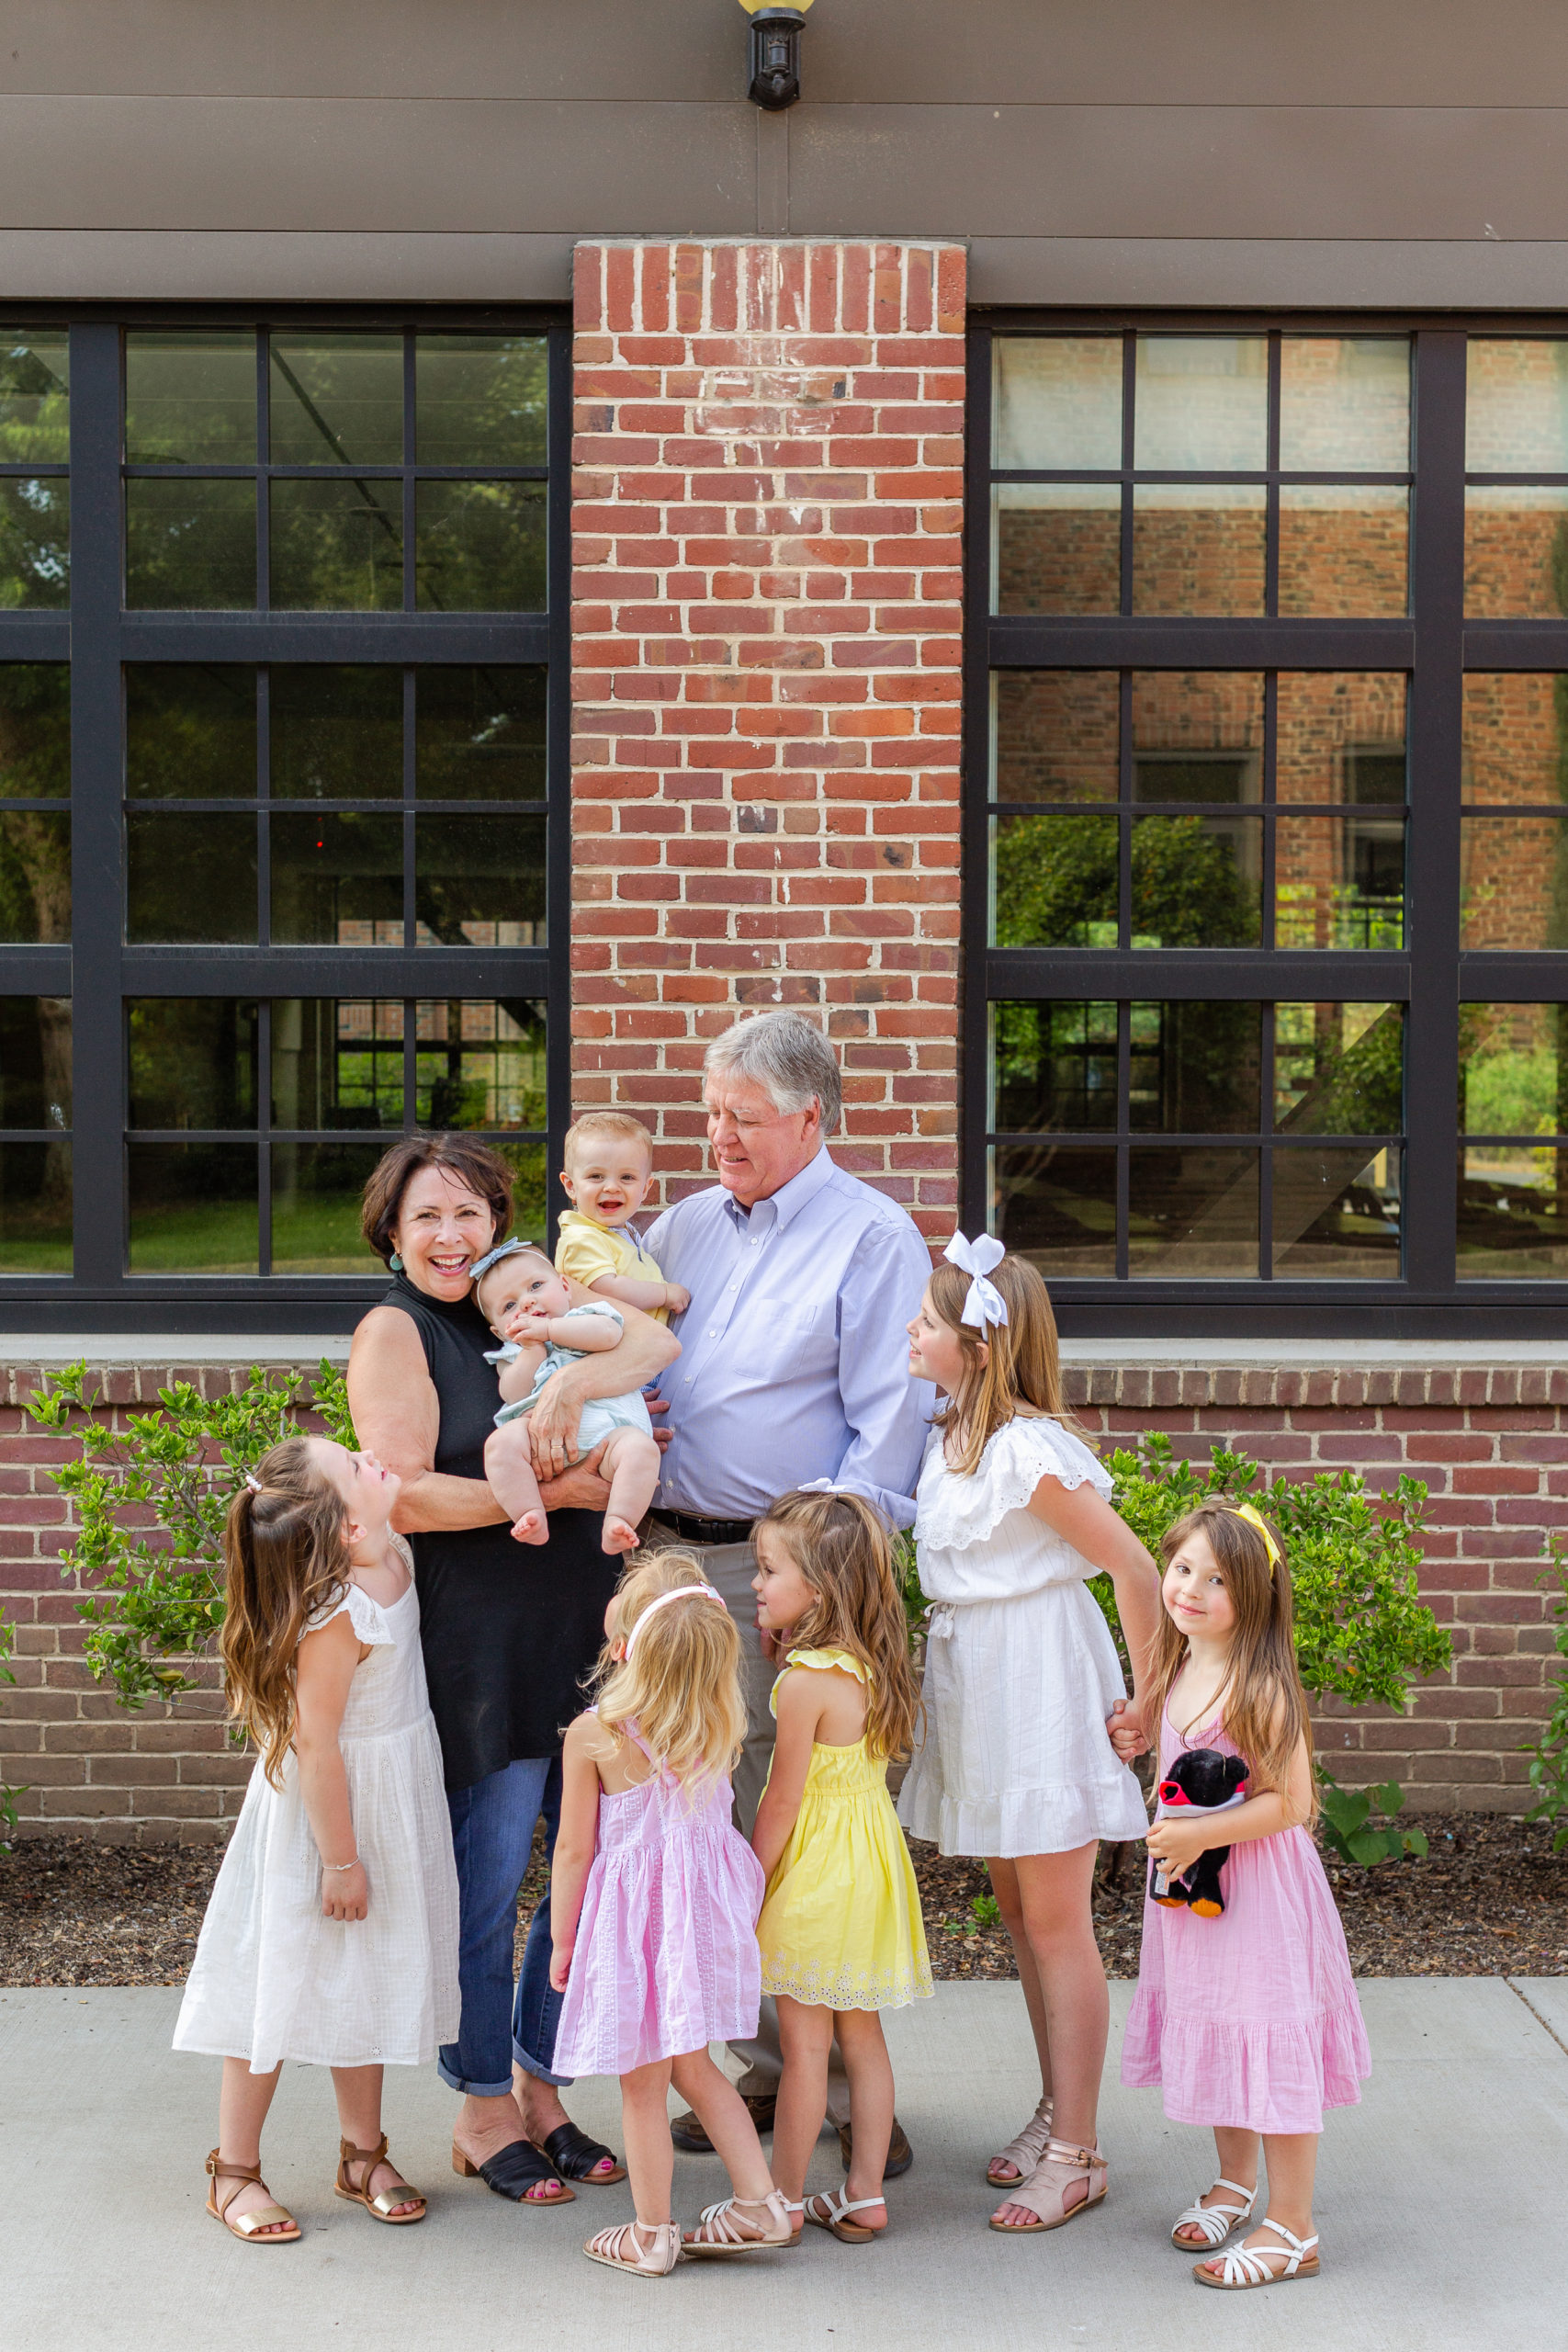 Large Extended Family Grandparents with Grandchildren with Brick Building | Mary + Don